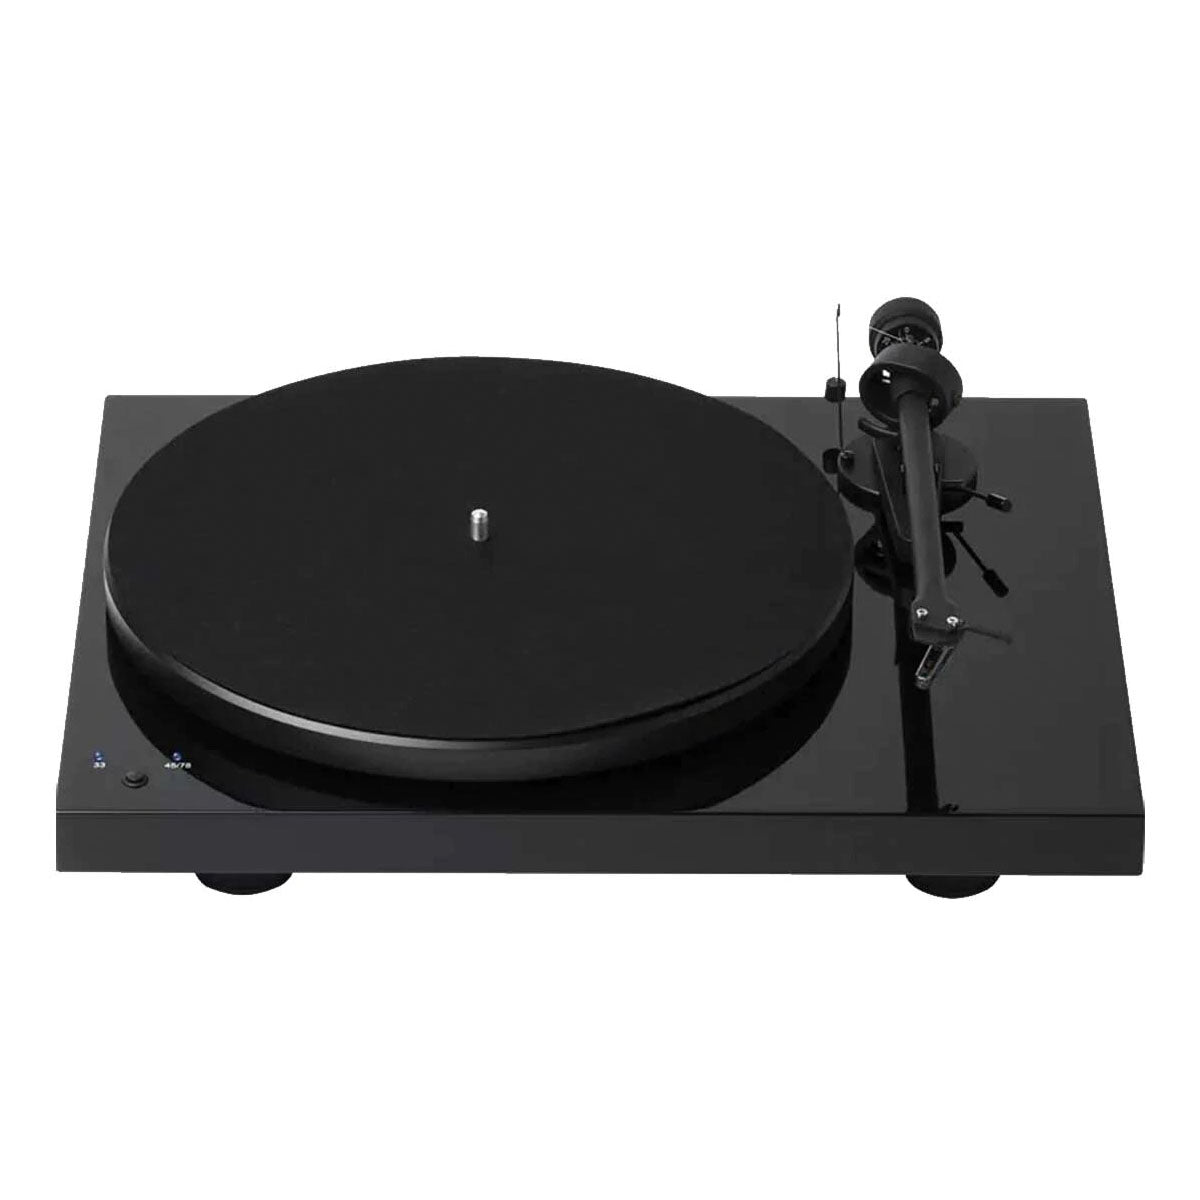 PRO-JECT- DEBUT III PHONO BT HG SB OM5E TURNTABLE - Pro-ject Audio at Vinyl Sound. Available at the best price: Pro-ject Turntables X1 - X8 - X2 – Pro-ject 6 PerspeX SB - RPM 1 Carbon - RPM 10 Carbon – Xtension 12 Evolution... Pro-ject HiFi Electronics Phono Preamplifier · Vinyl Recording · Pro-ject Preamplifier – Pro-ject Phono Box...